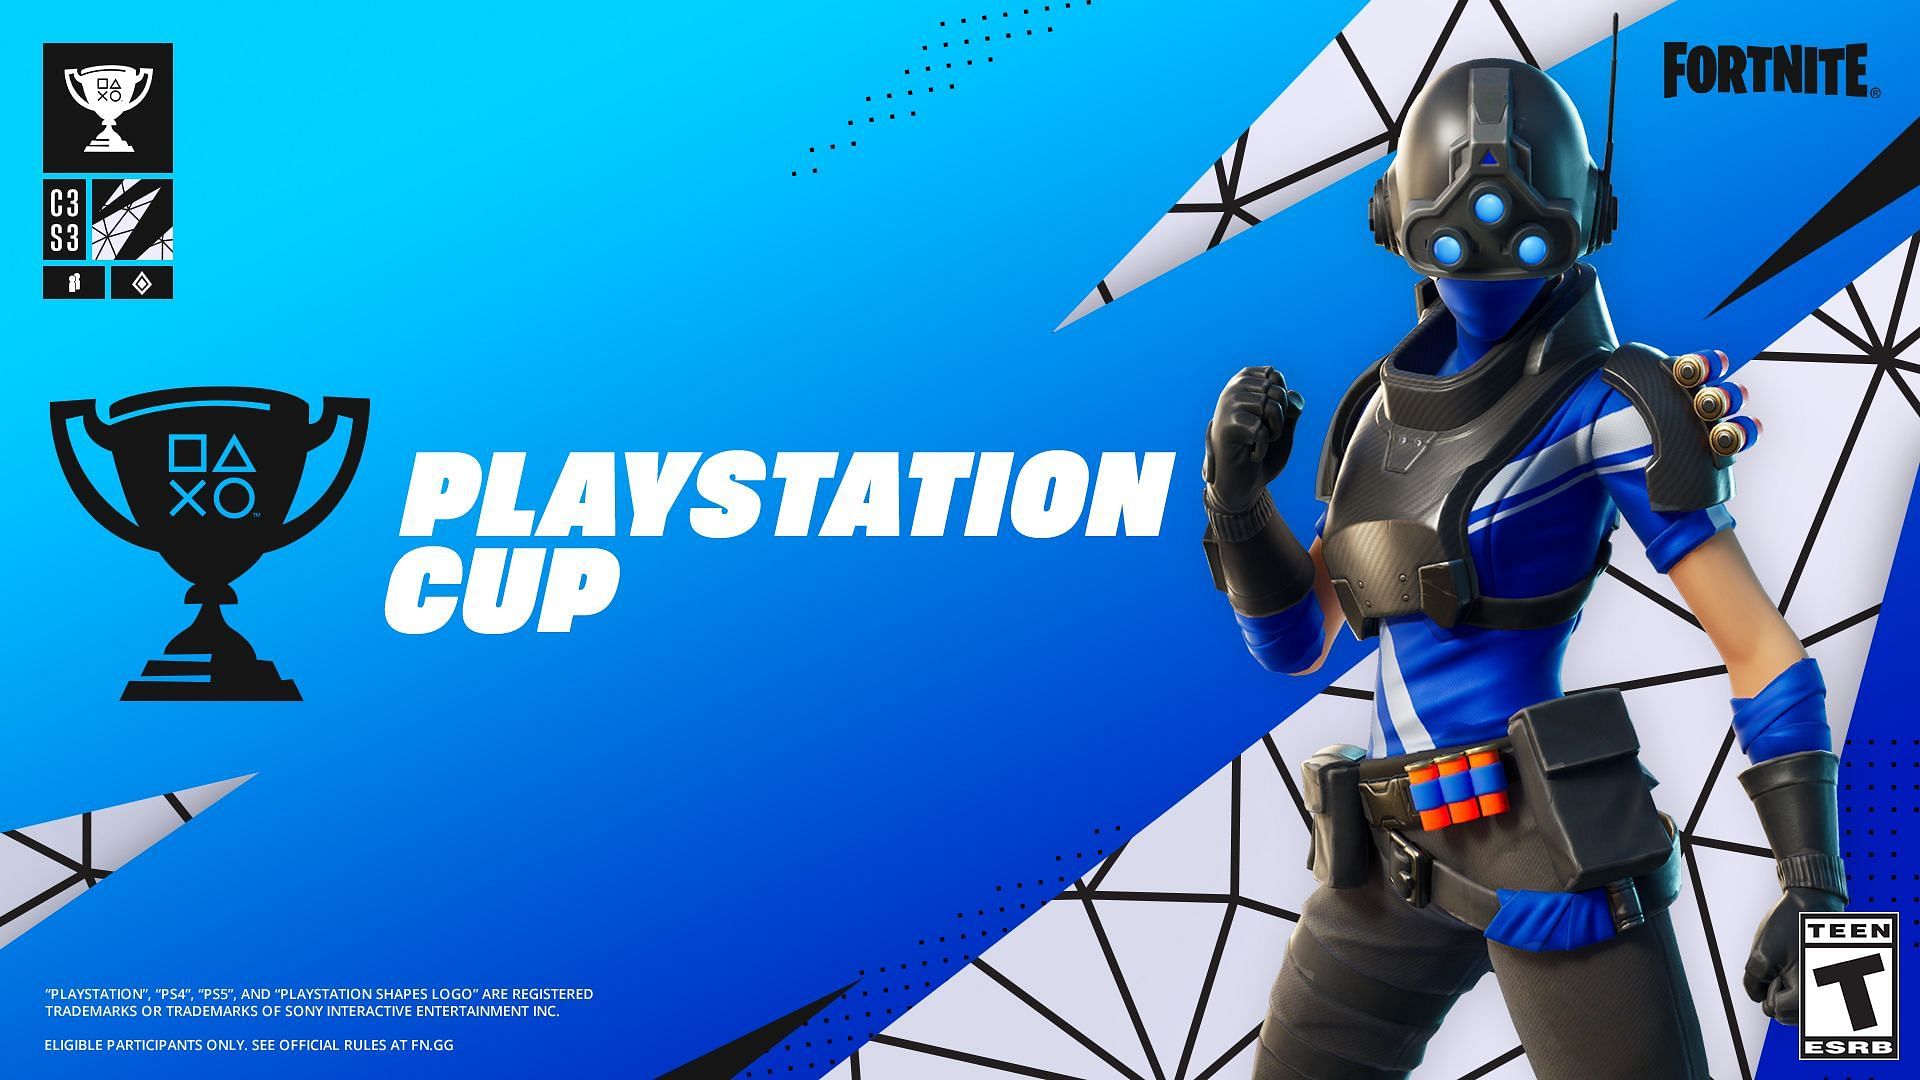 Fortnite PlayStation Cup (August 2022) Date and time, free rewards